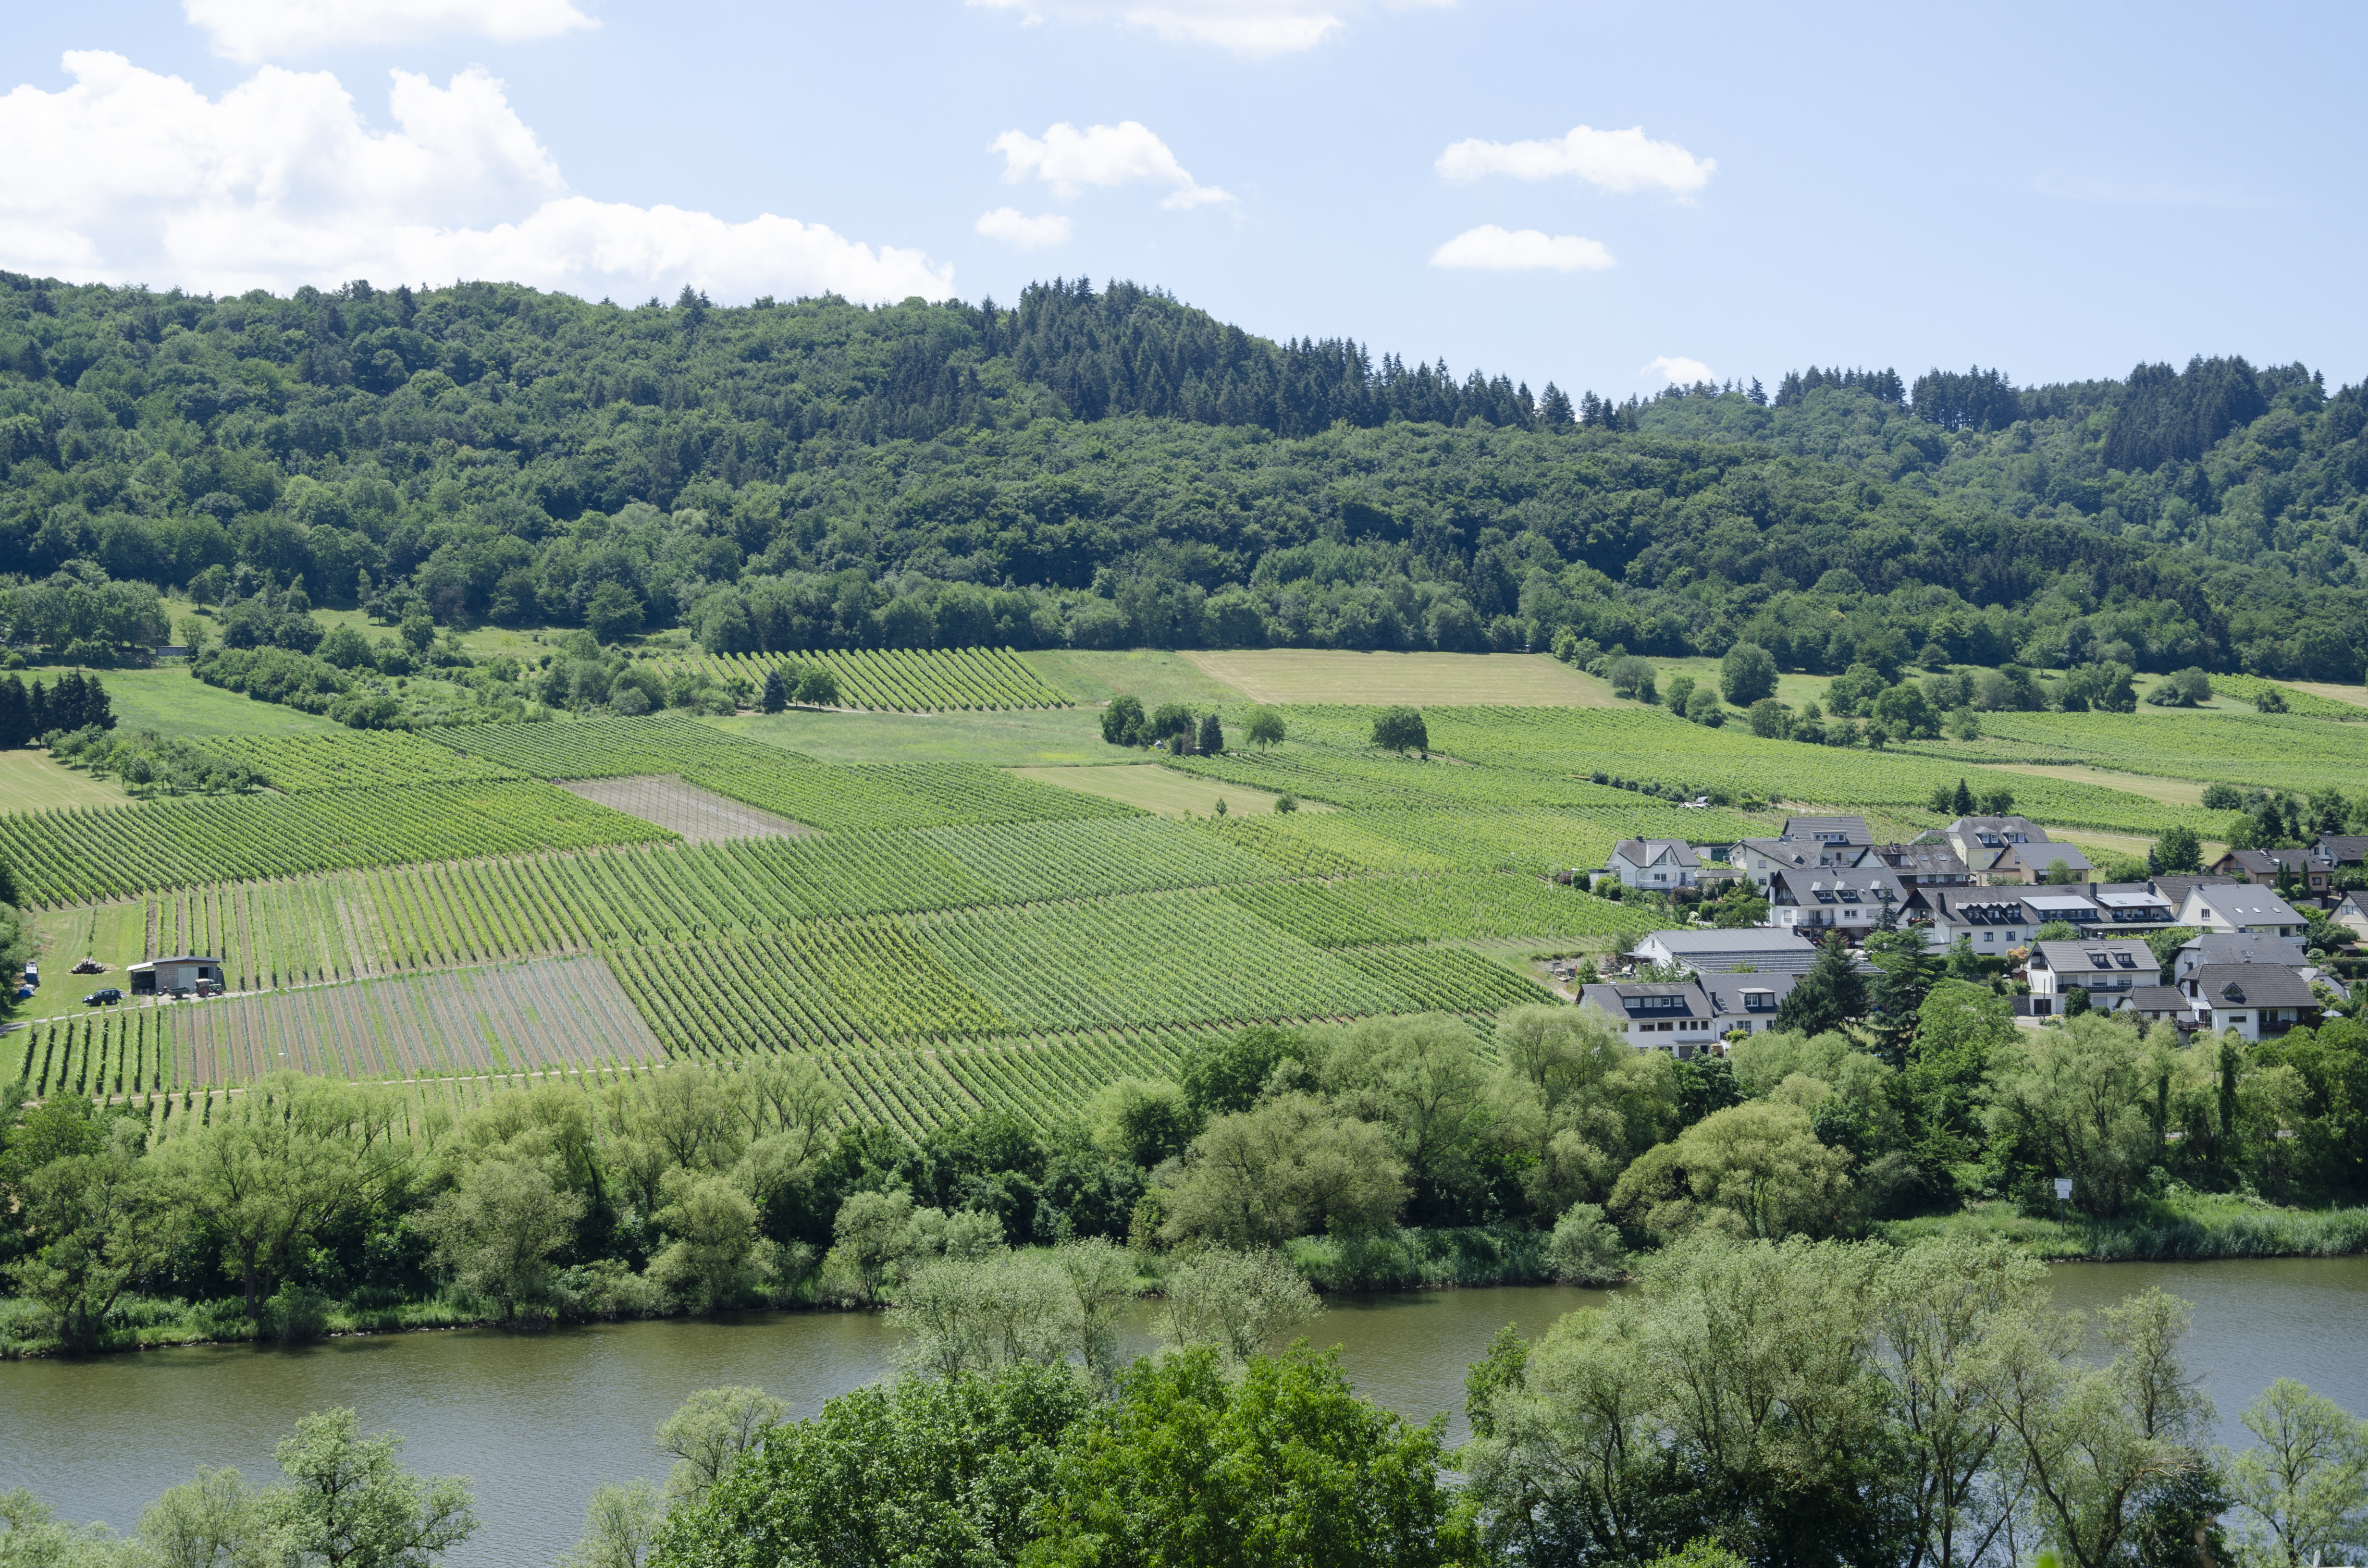 Vineyards by the Mosel jun 2018 (3)